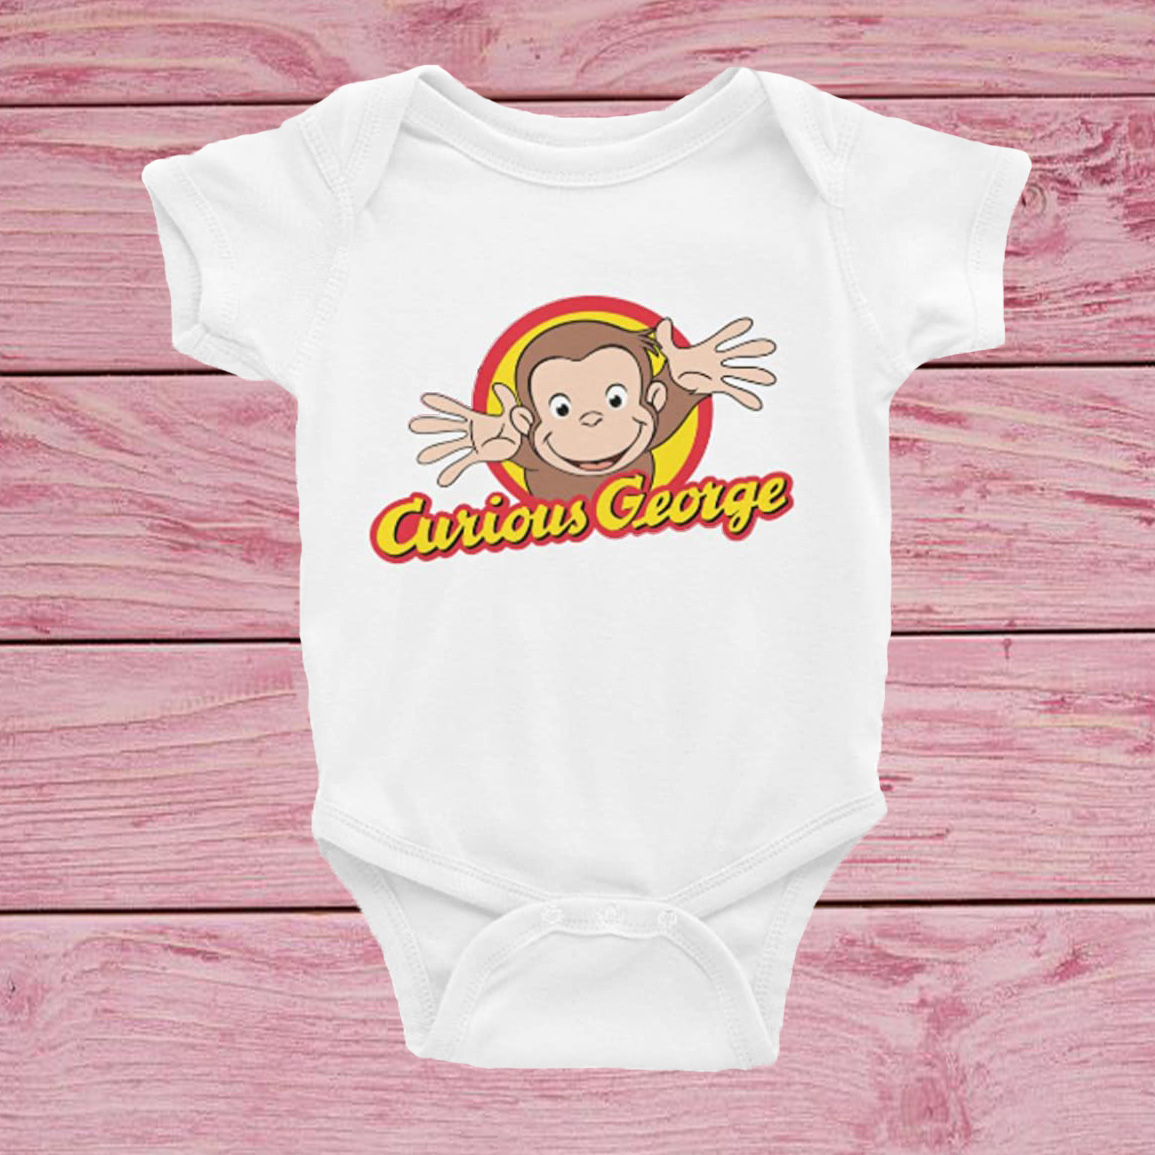 Personalized Curious George Birthday Shirt, Personalized Name and Age, Customized Curious George Family Shirts